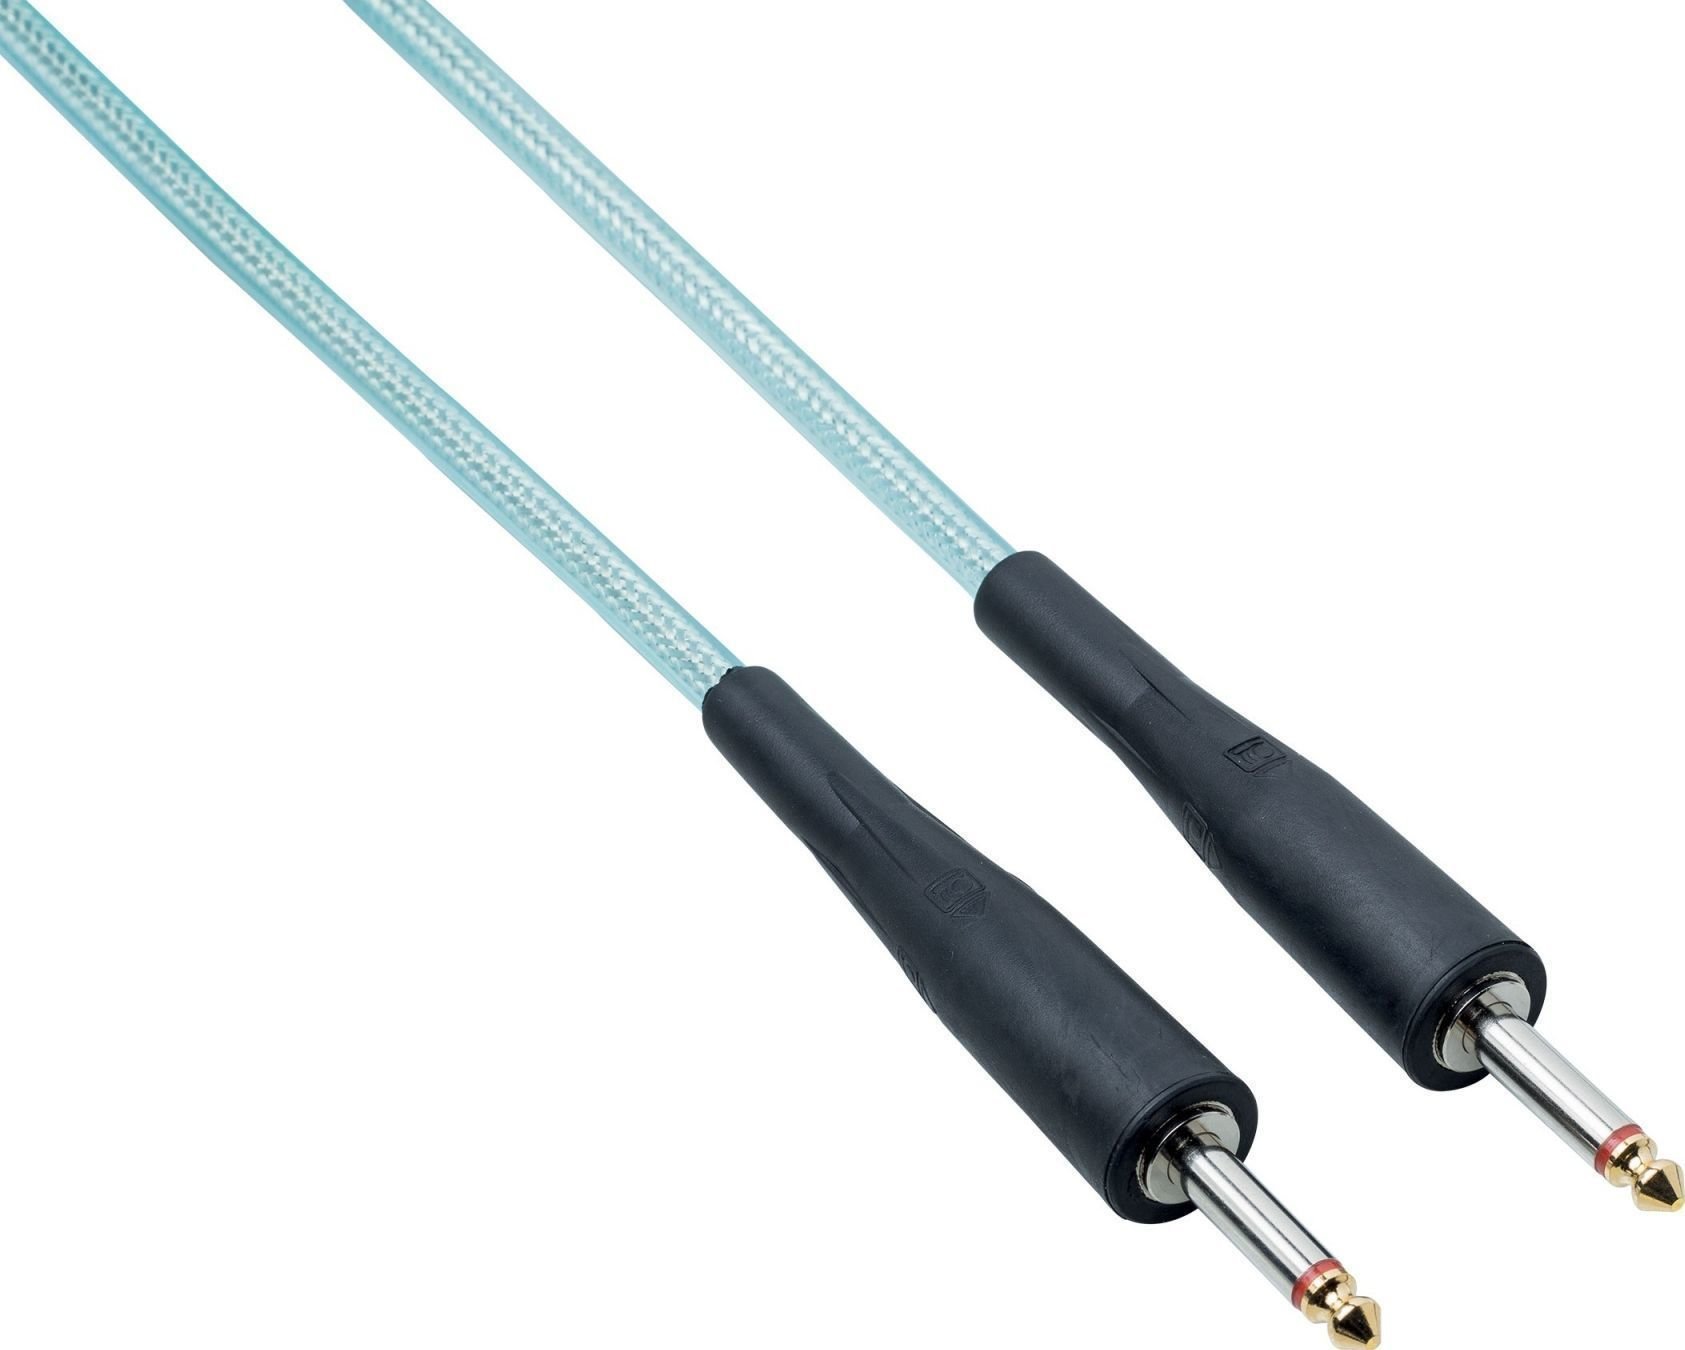 Instrument Cable Bespeco LZ900 Blue 9 m Straight - Straight (Pre-owned)